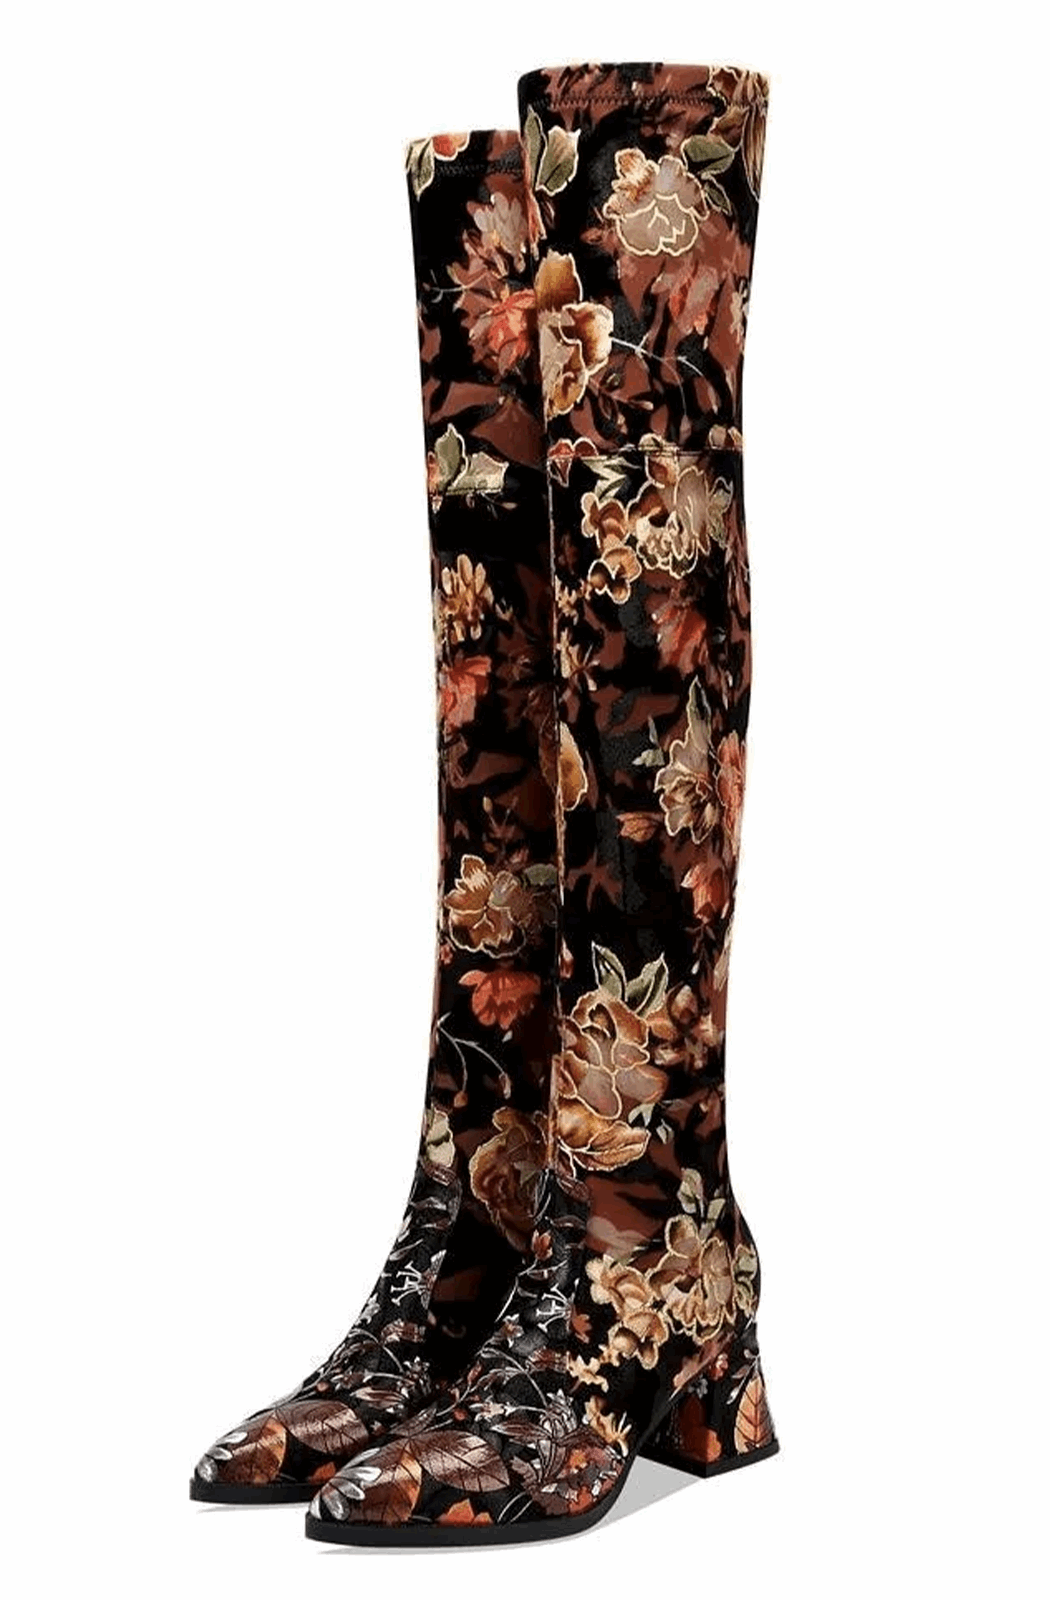 Over the knee boots embroider flower with square heels